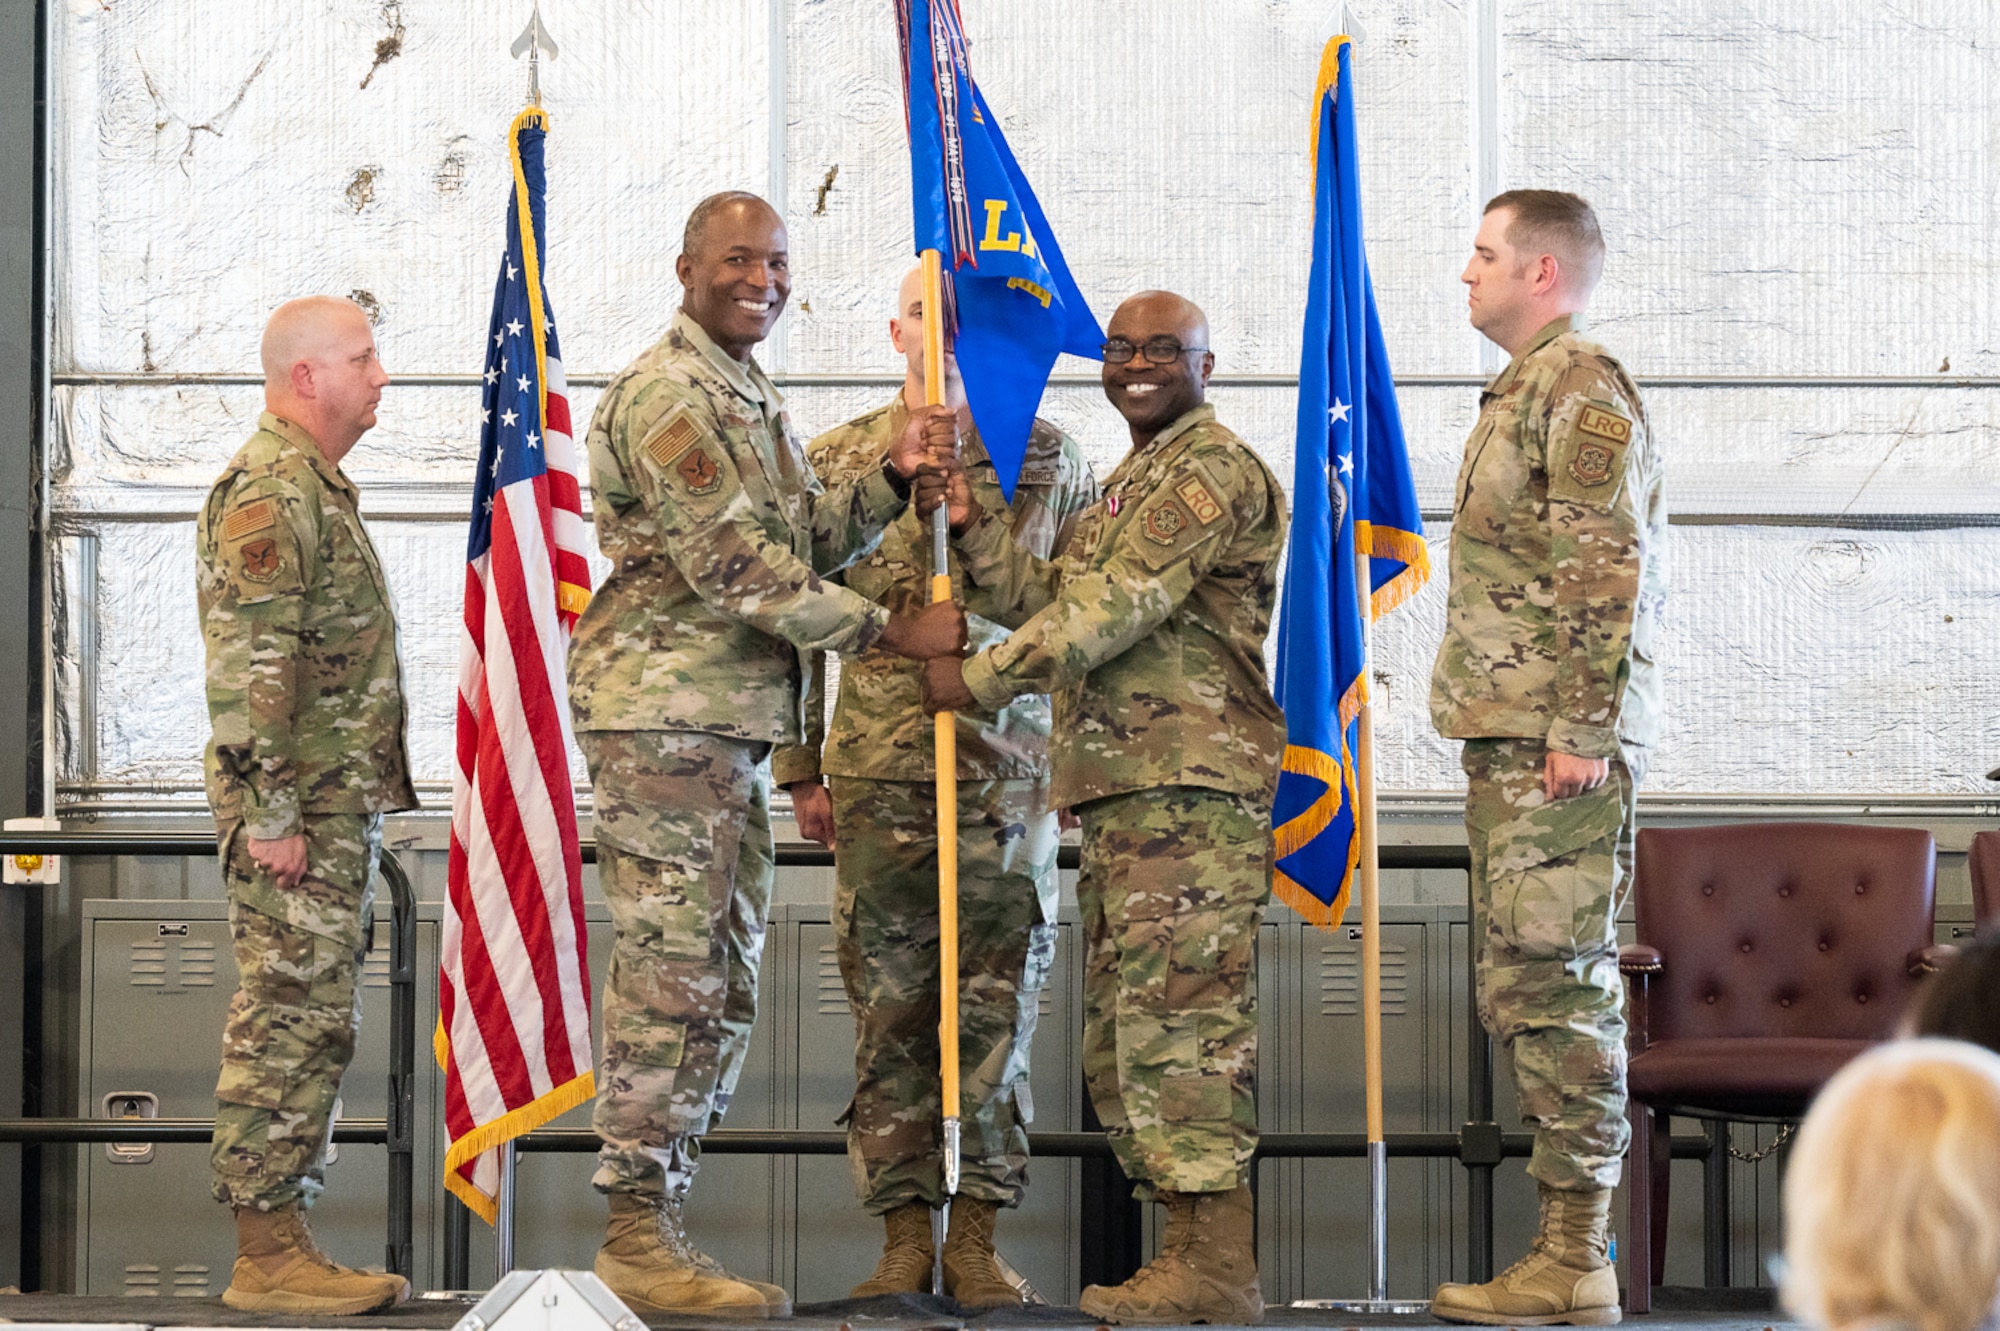 Maj. George Okorodudu, center right, outgoing 436th Logistics Readiness Squadron commander, passes the guidon to Col. Phelemon Williams, 436th Mission Support Group commander, during a change of command ceremony at Dover Air Force Base, Delaware, June 6, 2022. The ceremony saw Okorodudu relinquish command of the 436th LRS to Maj. James Greenwood and the squadron was redesignated under the newly activated 436th Mission Generation Group. (U.S. Air Force photo by Mauricio Campino)